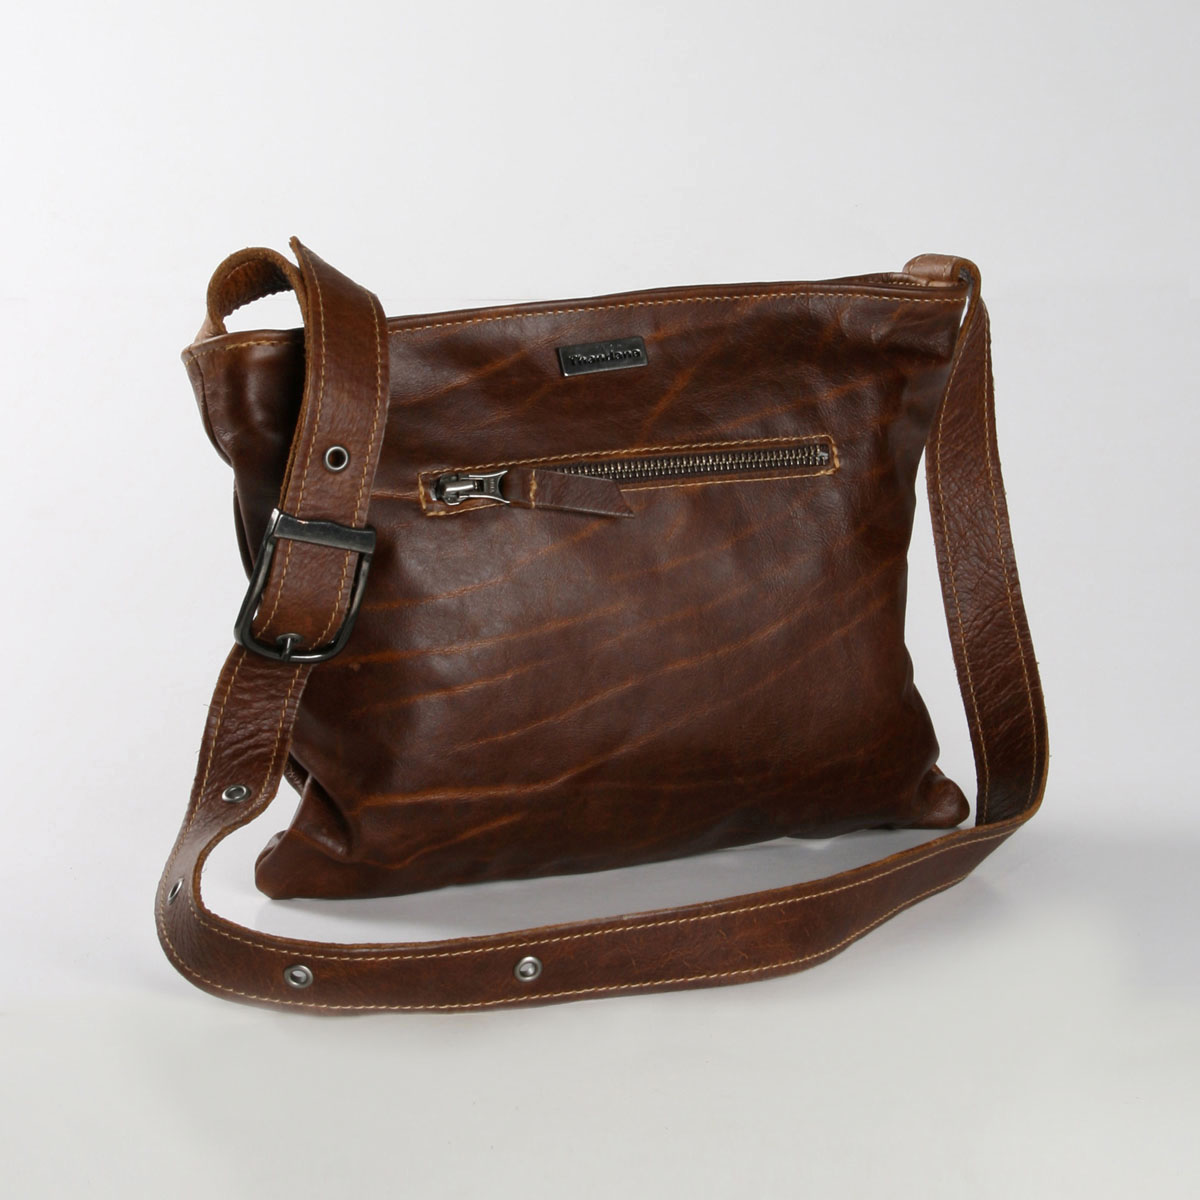 Macaroon Collection: Thandana leather messenger bags